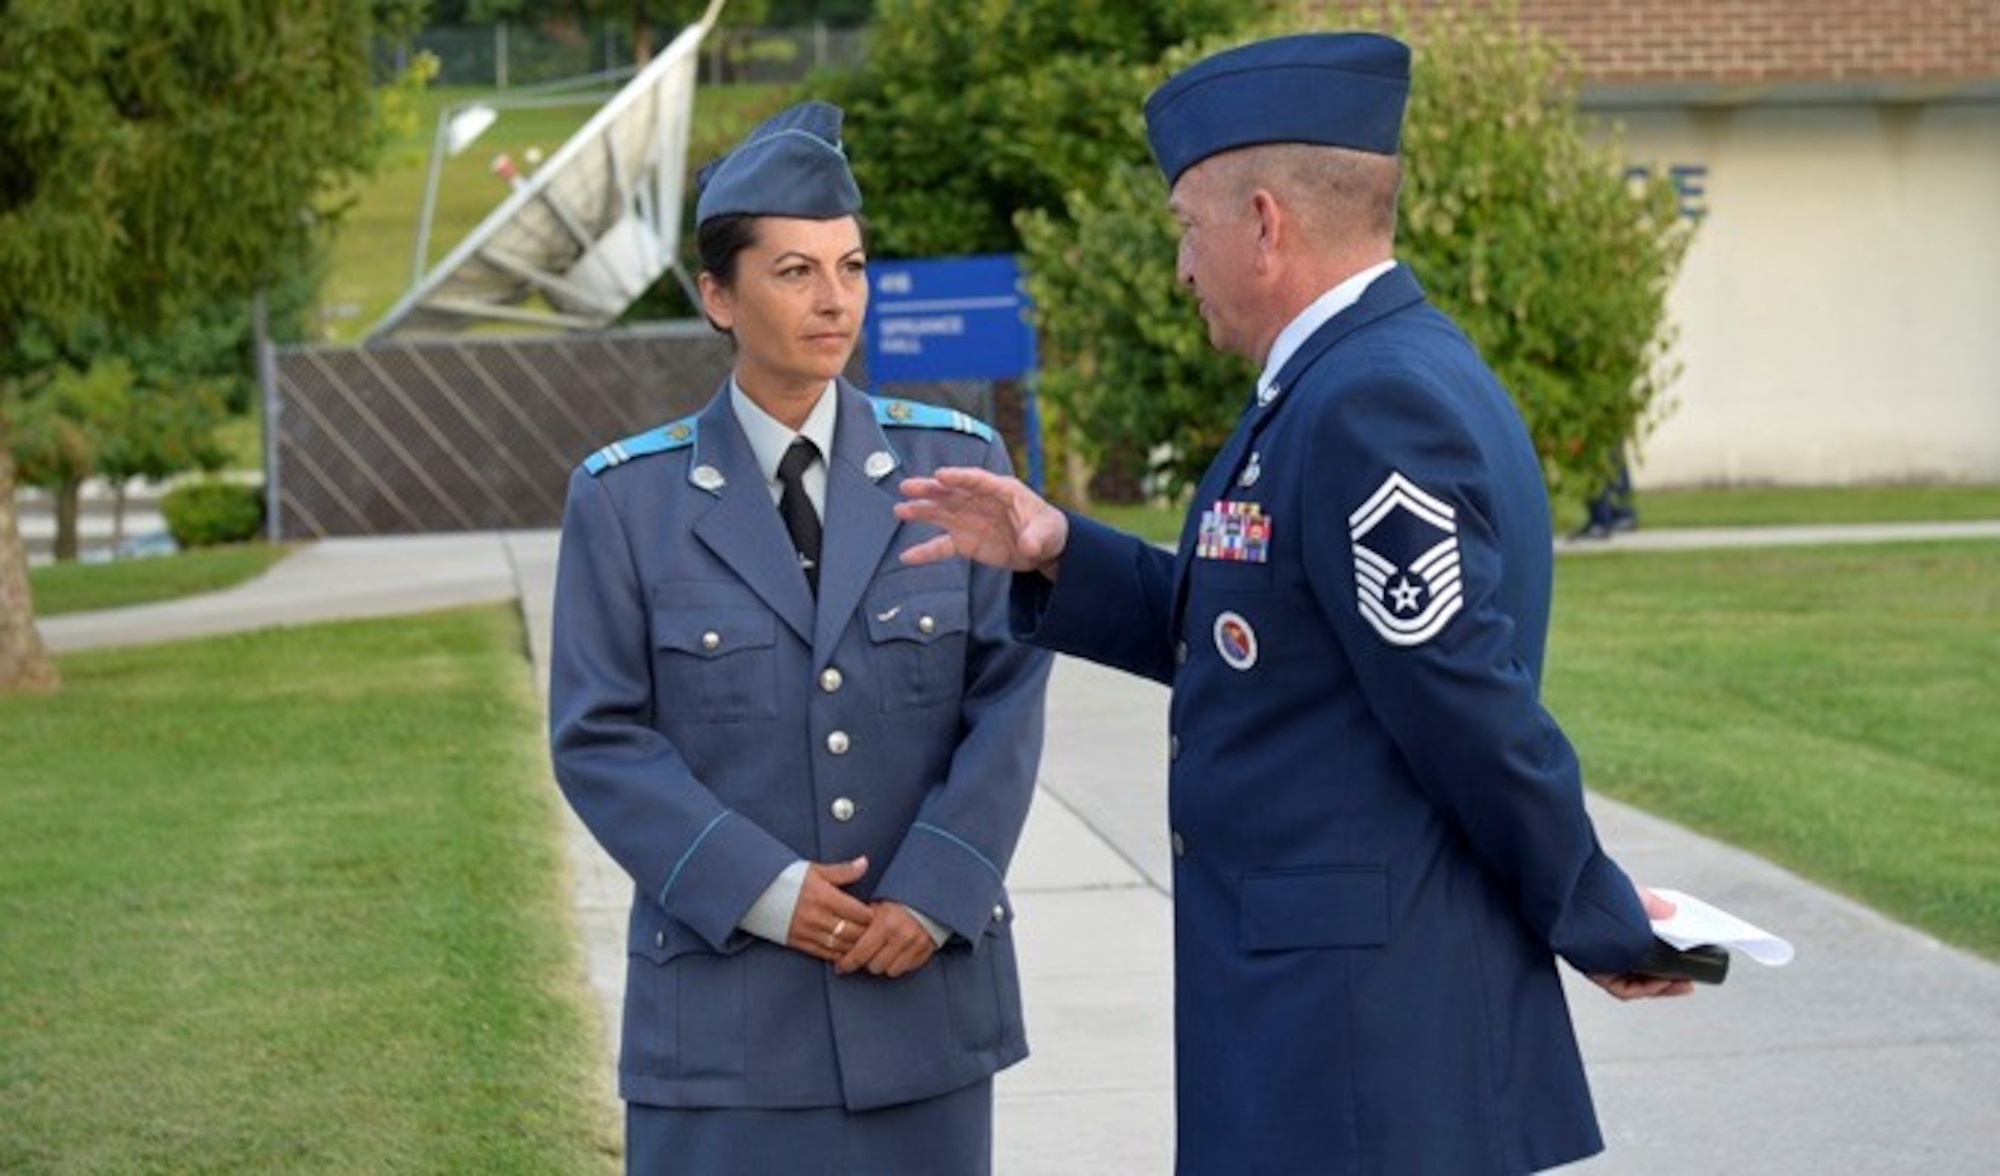 Sgt. Yordanka S. Petrova-Angelova with the Bulgarian air force talks with Senior Master Sgt. Andrew Traugot here August 15, 2013, at McGhee Tyson Air National Guard Base. Petrova-Angelova graduated from the U.S. Air Force NCO Academy along with Bulgarian Cpl. Stoyko V. Stoykov, who attended Airman Leadership School at around the same time. The bulgarian Airmen completed the leadership education this summer as part of relations built through the Tennessee National Guard State Partnership Program. Traugot is the director of education, Satellite EPME at the I.G. Brown Training and Education Center.